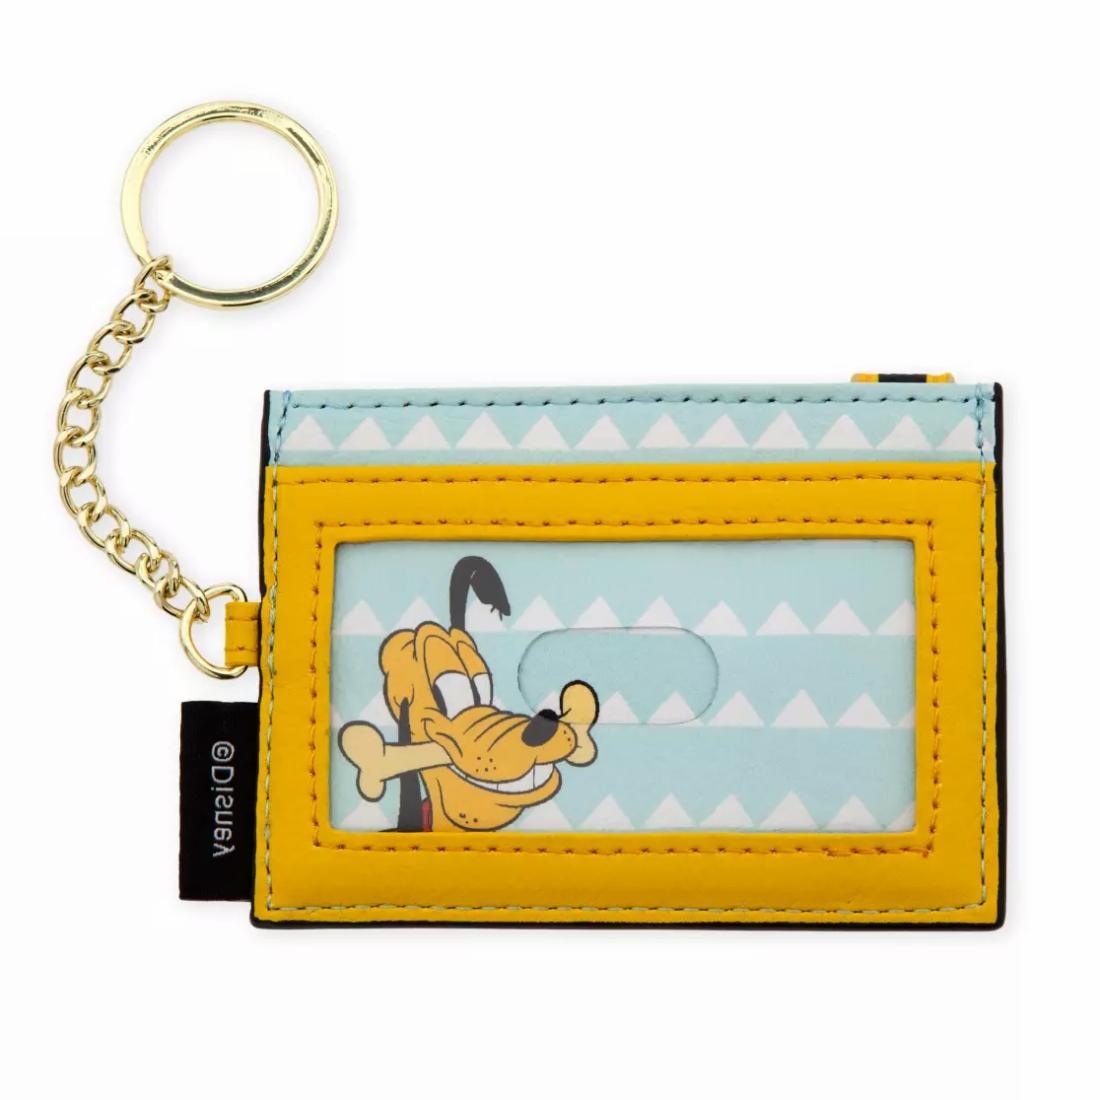 Disney Pluto Card Wallet with Keychain - BumbleToys - 14 Years & Up, 5-7 Years, 8-13 Years, Boys, Characters, Disney, Girls, Pre-Order, Wallet